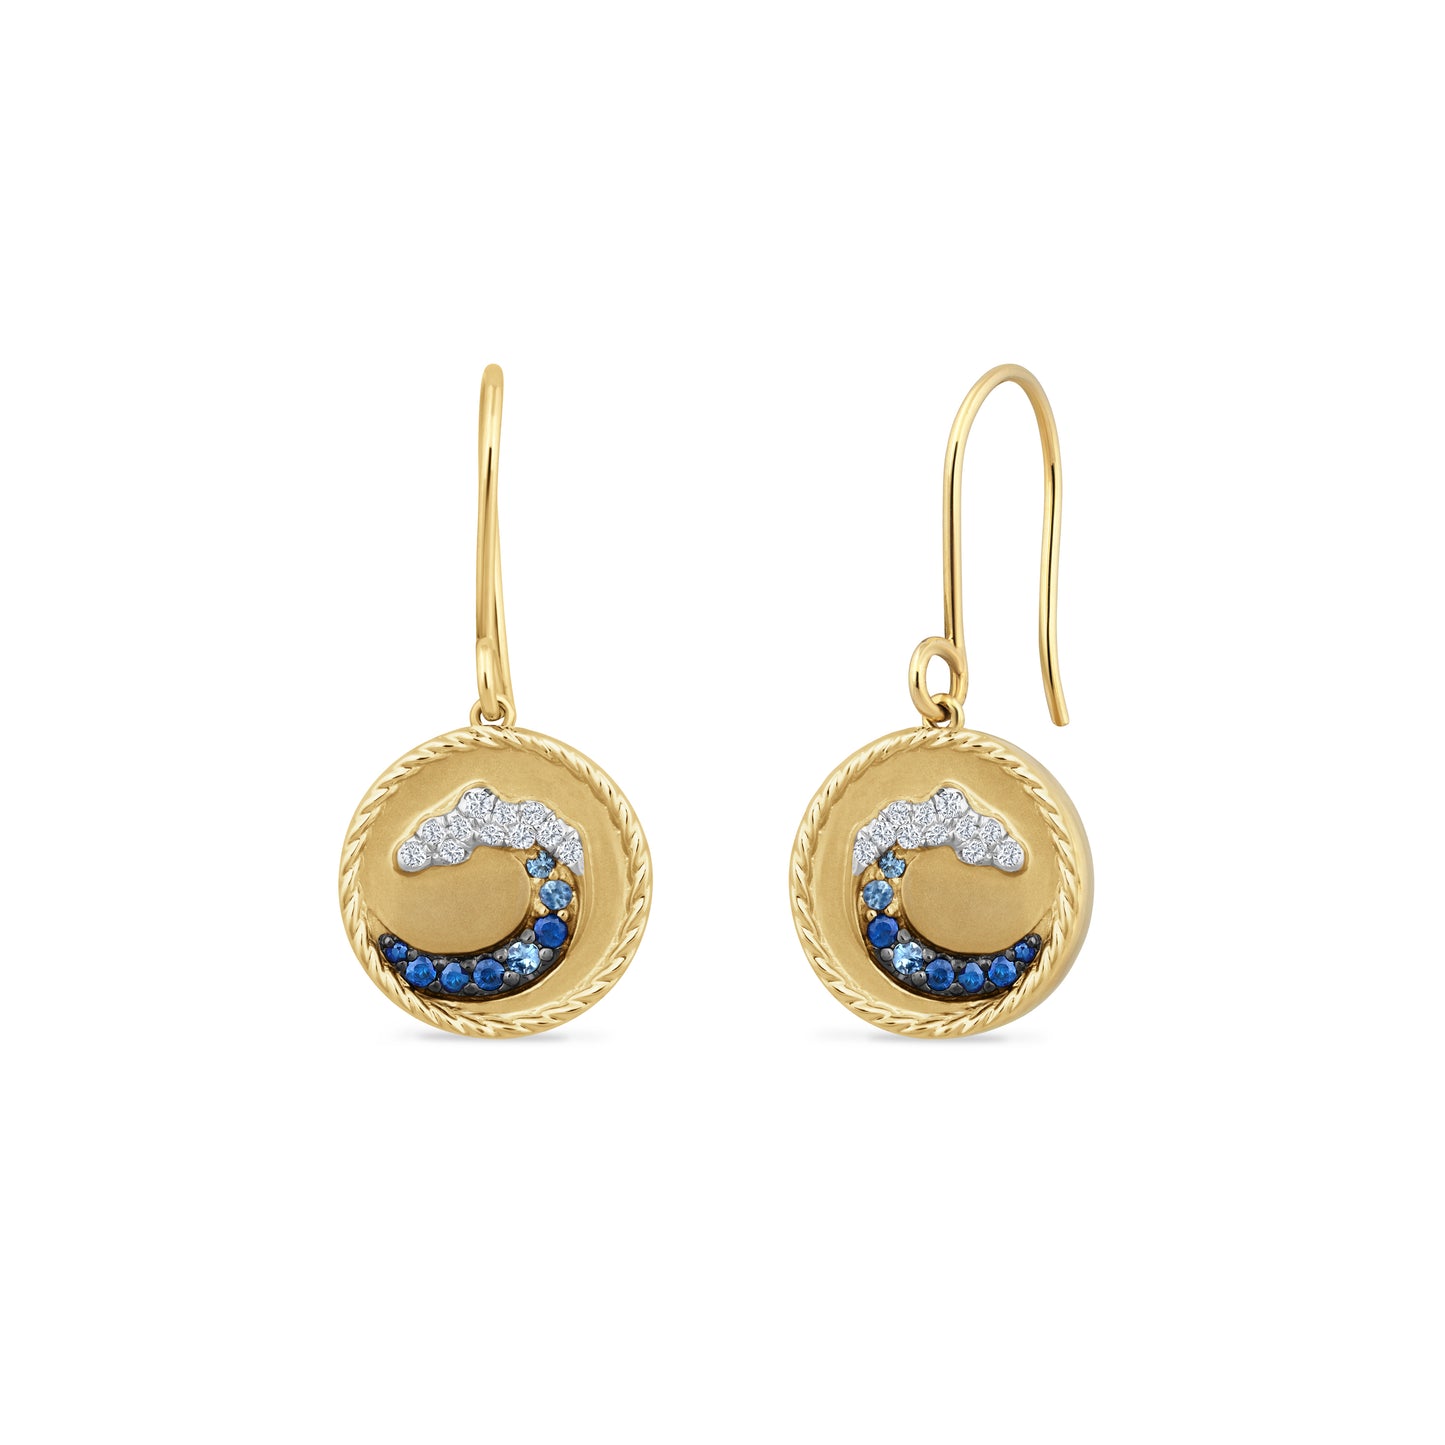 14K WAVE EARRINGS WITH 16 BLUE SAPPHIRES 0.18CT & 22 DIAMONDS 0.12CT, 13MM DIAMETER